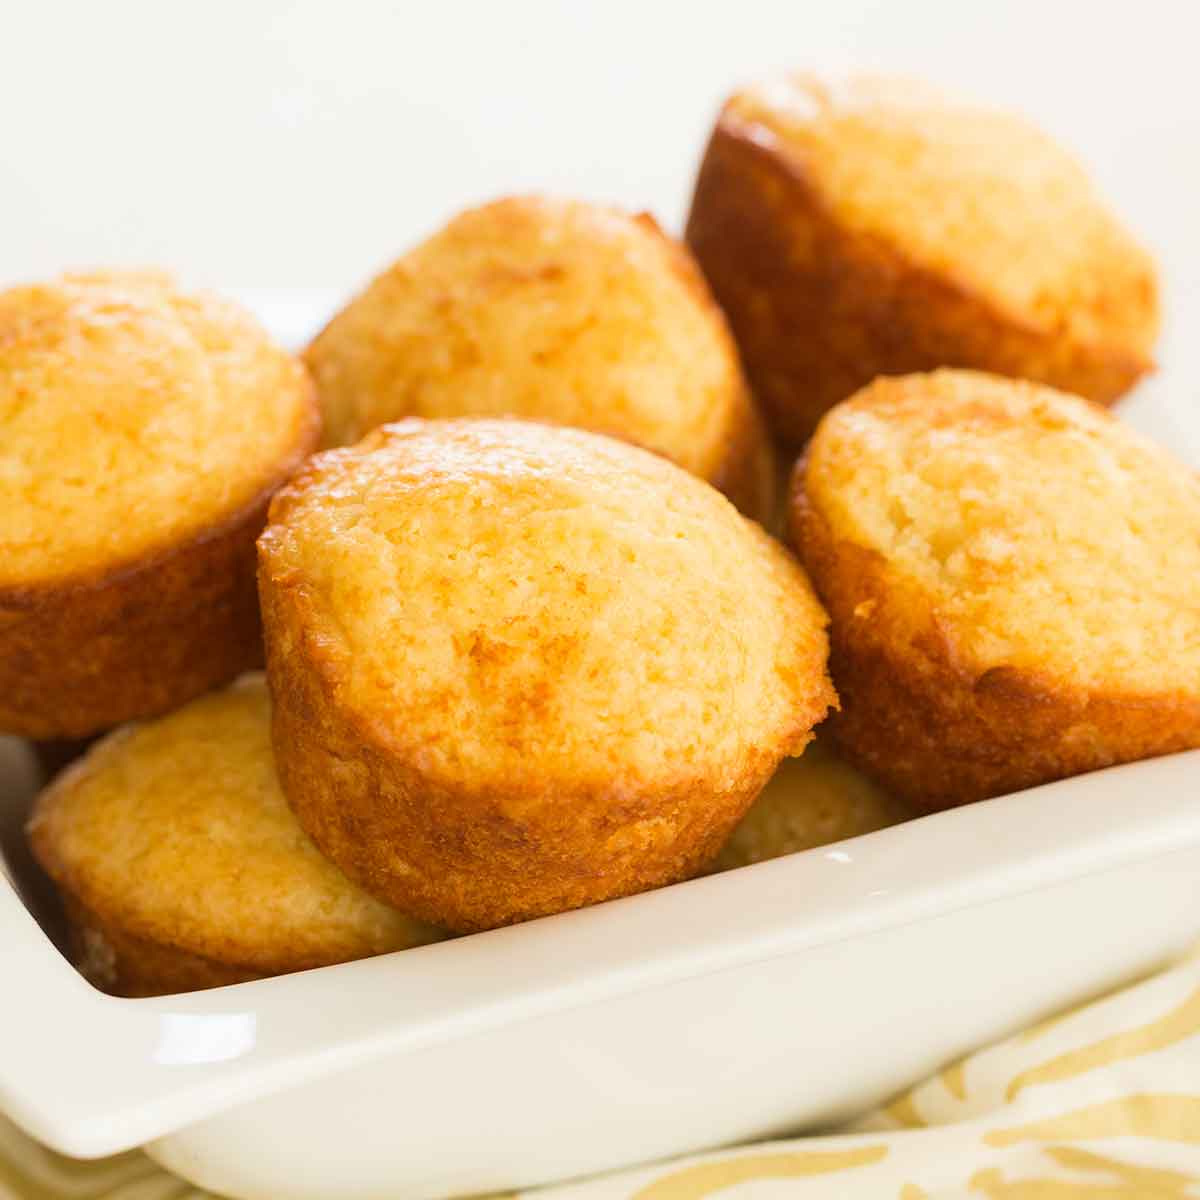 A batch of honey muffins piled into a white bowl.